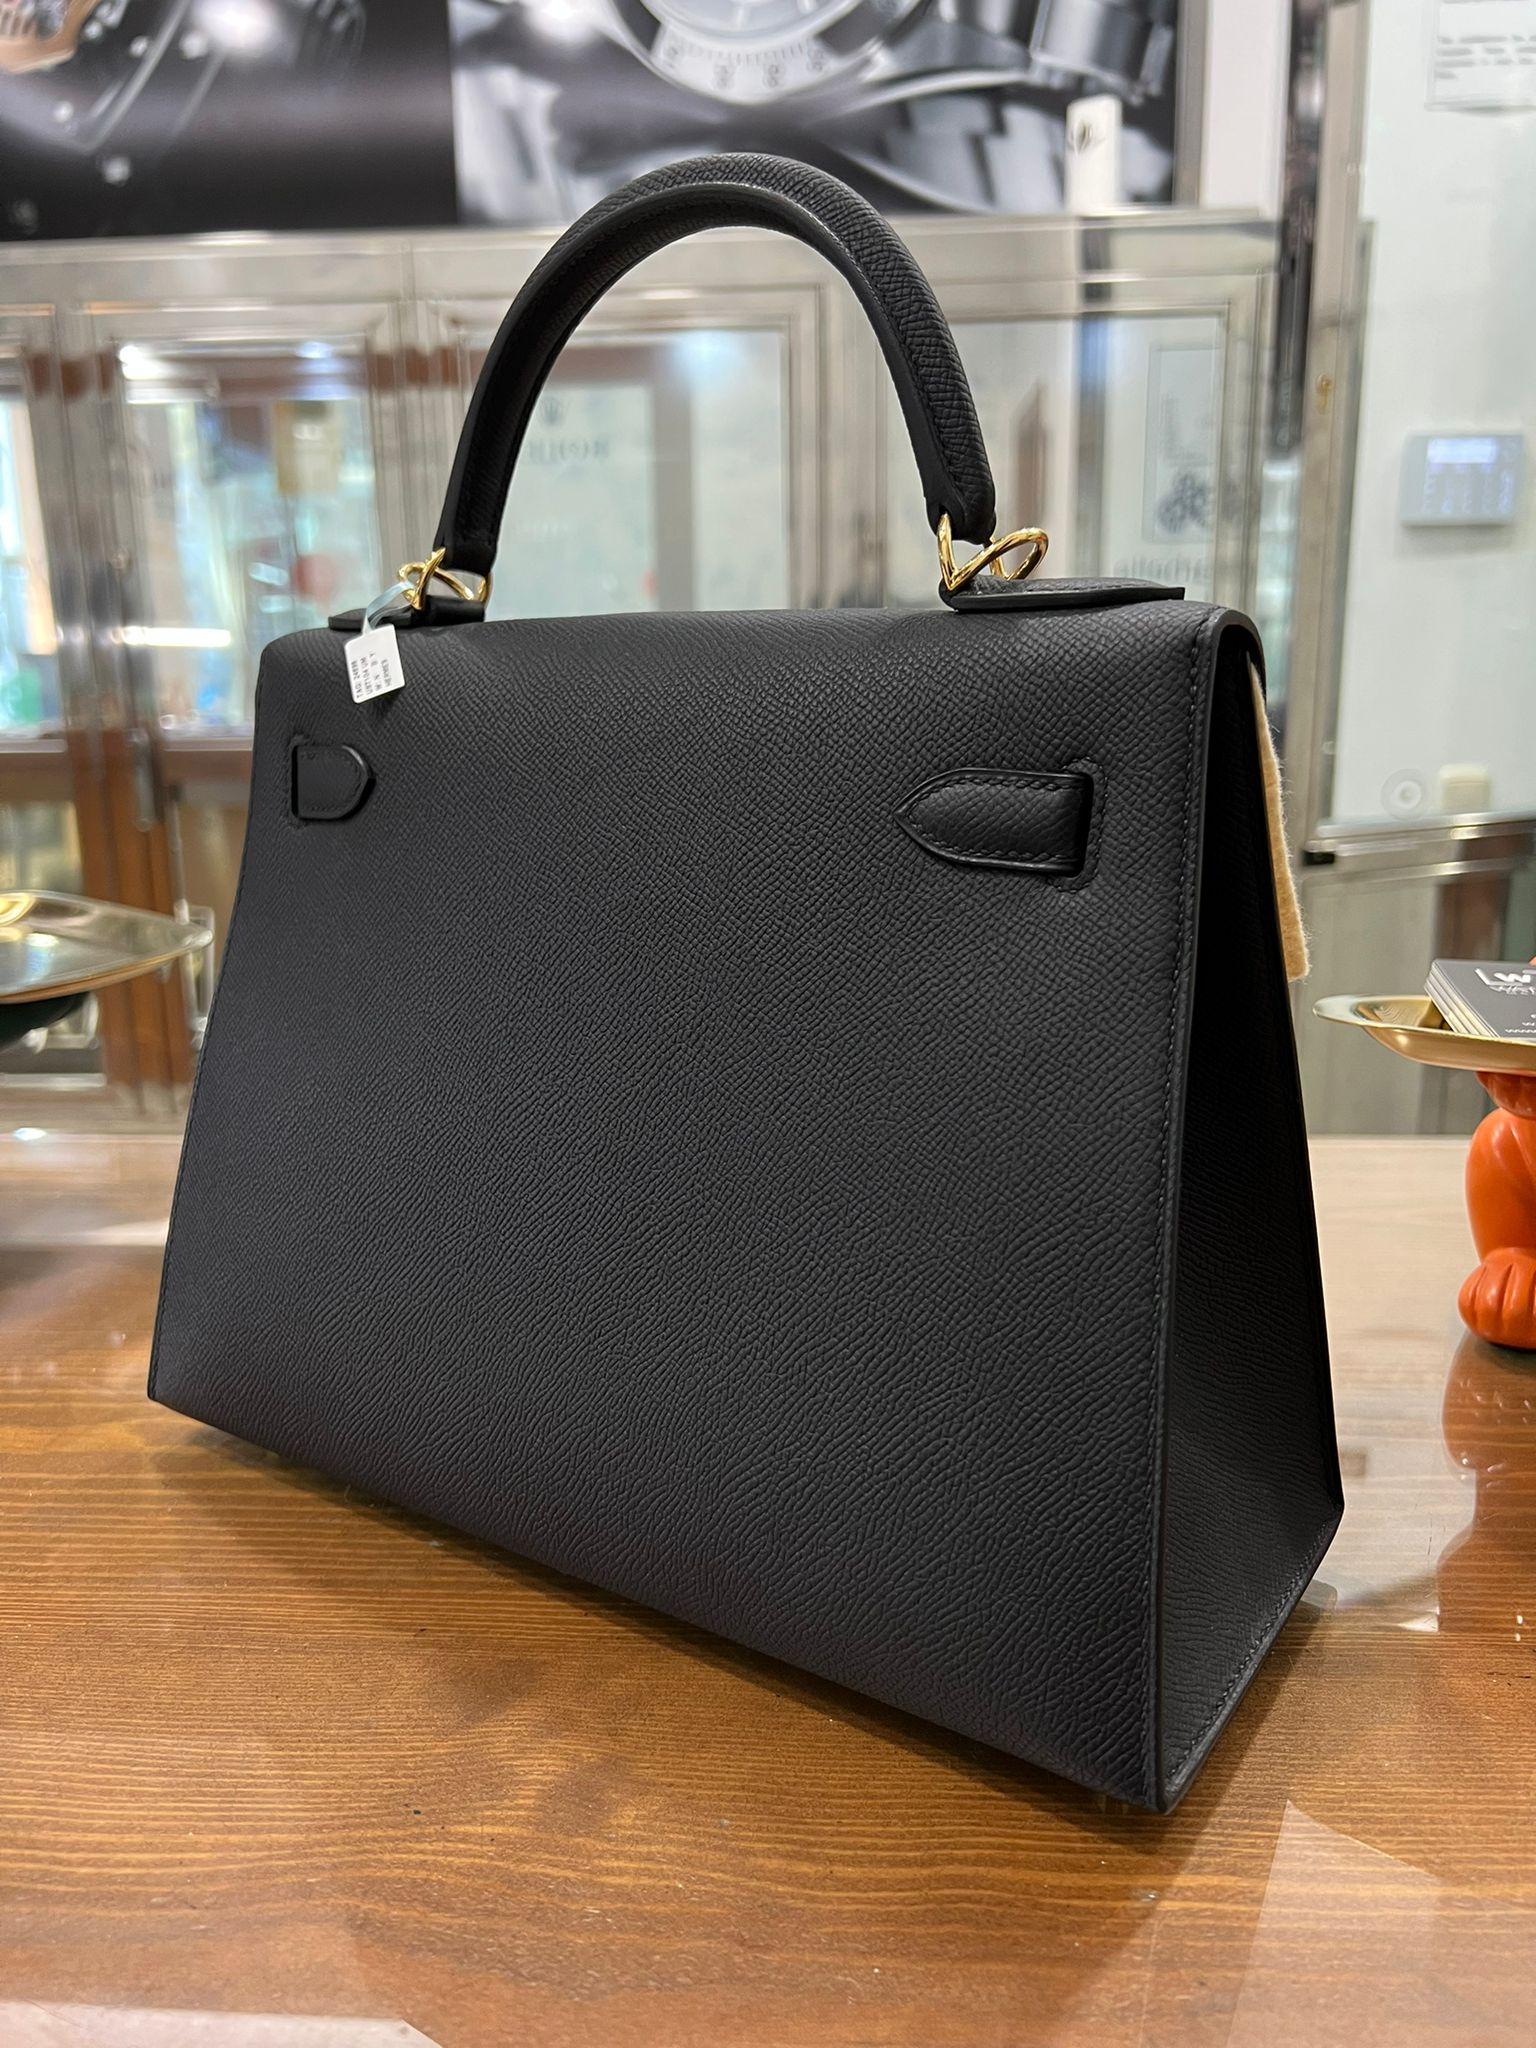 Hermes Kelly 28 Sellier Noir Black Epsom Gold Hardware 
New Never used. A Collectors Piece
Measurements : 22cm High x 28cm Wide x 10cm Deep
The Kelly bag came to success when it was first paparazzied on the bumpy belly of Princess Grace Kelly in